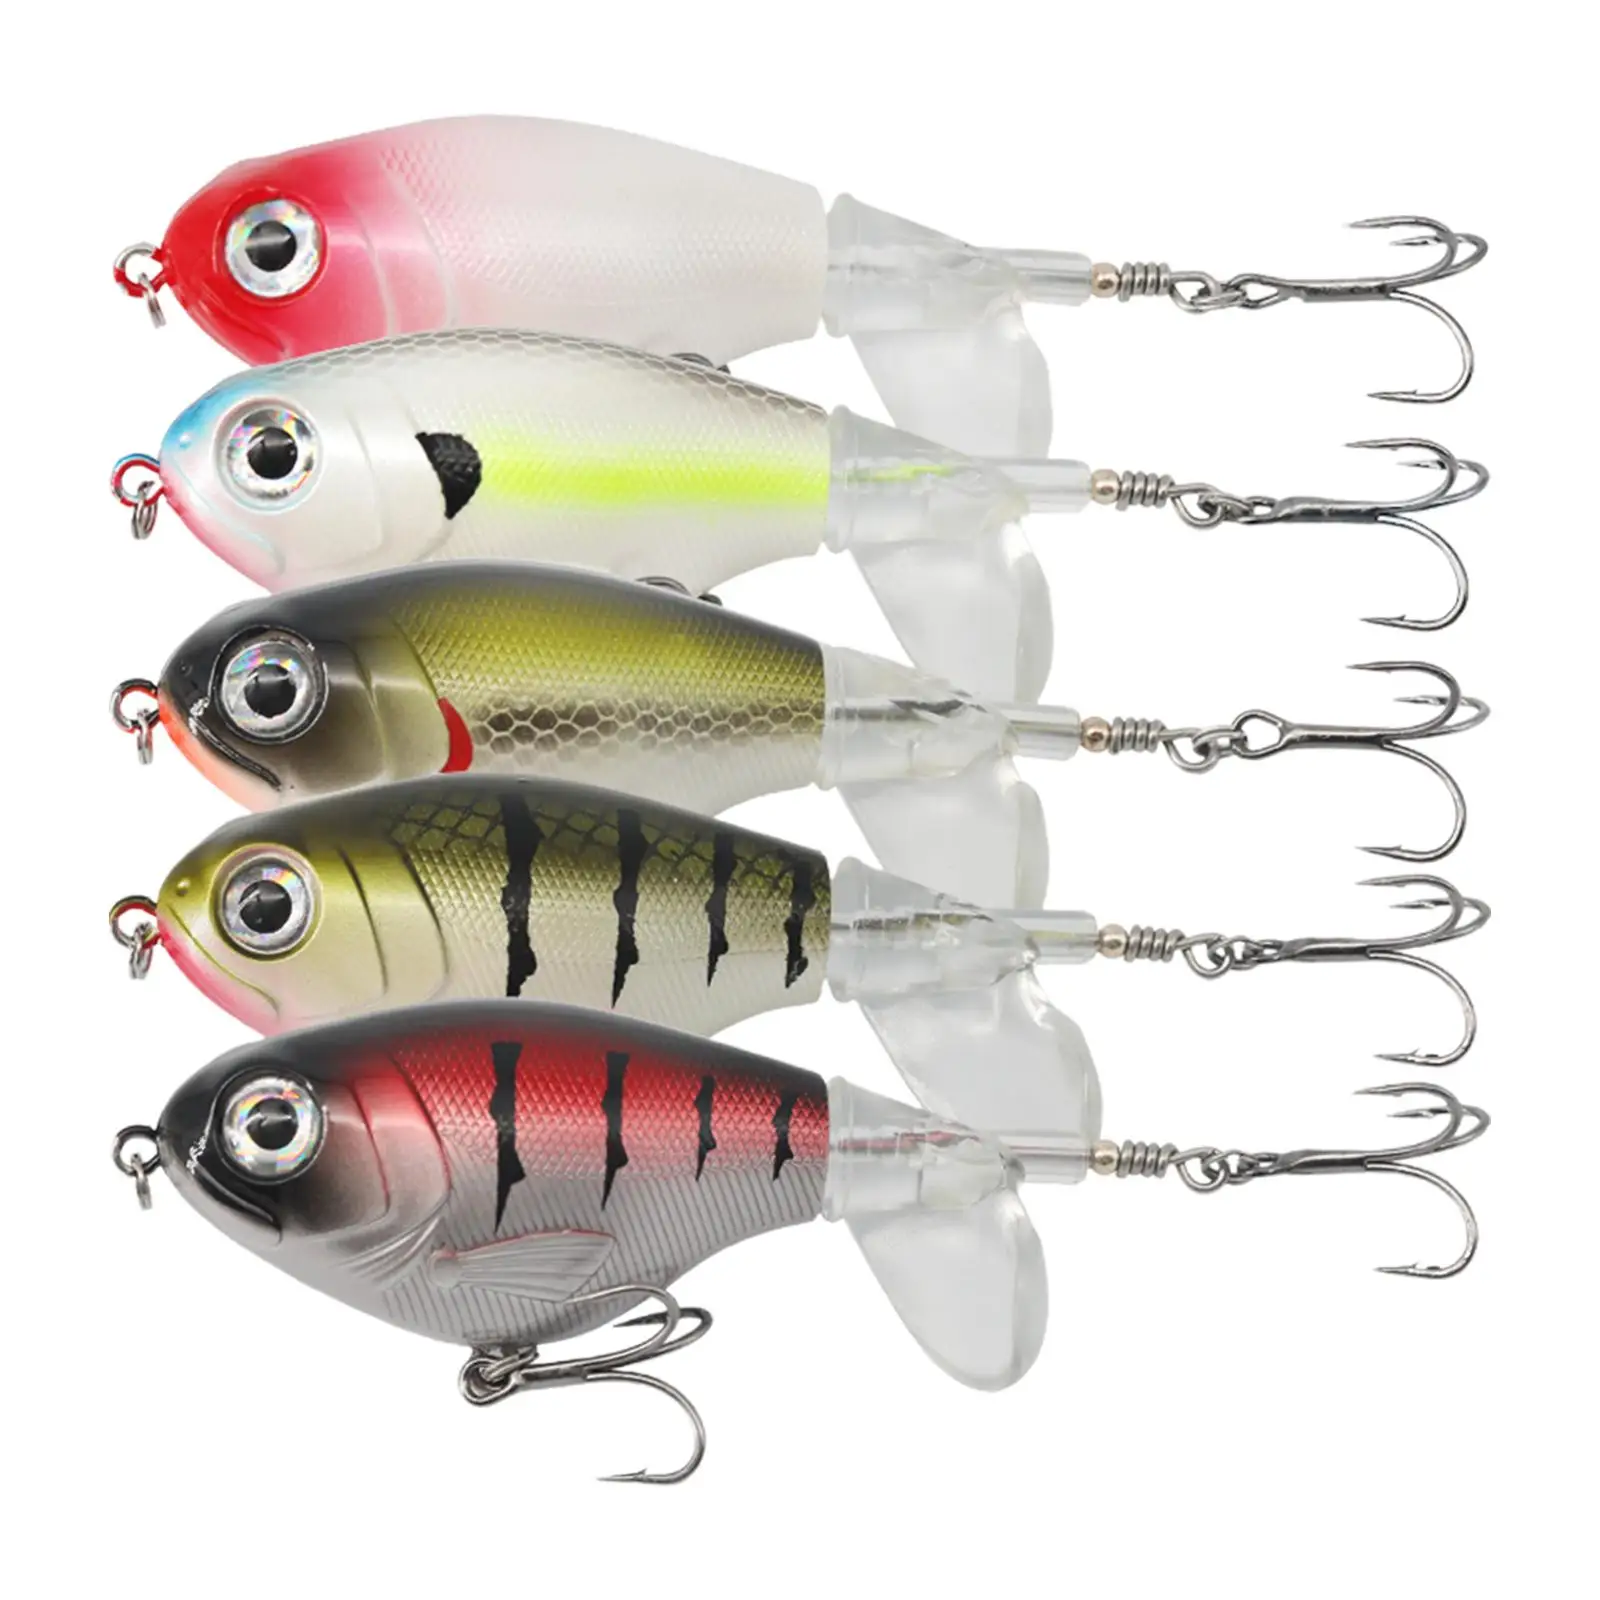 5x Fishing Lures Propeller Tail Swimbaits Hard Baits for Saltwater